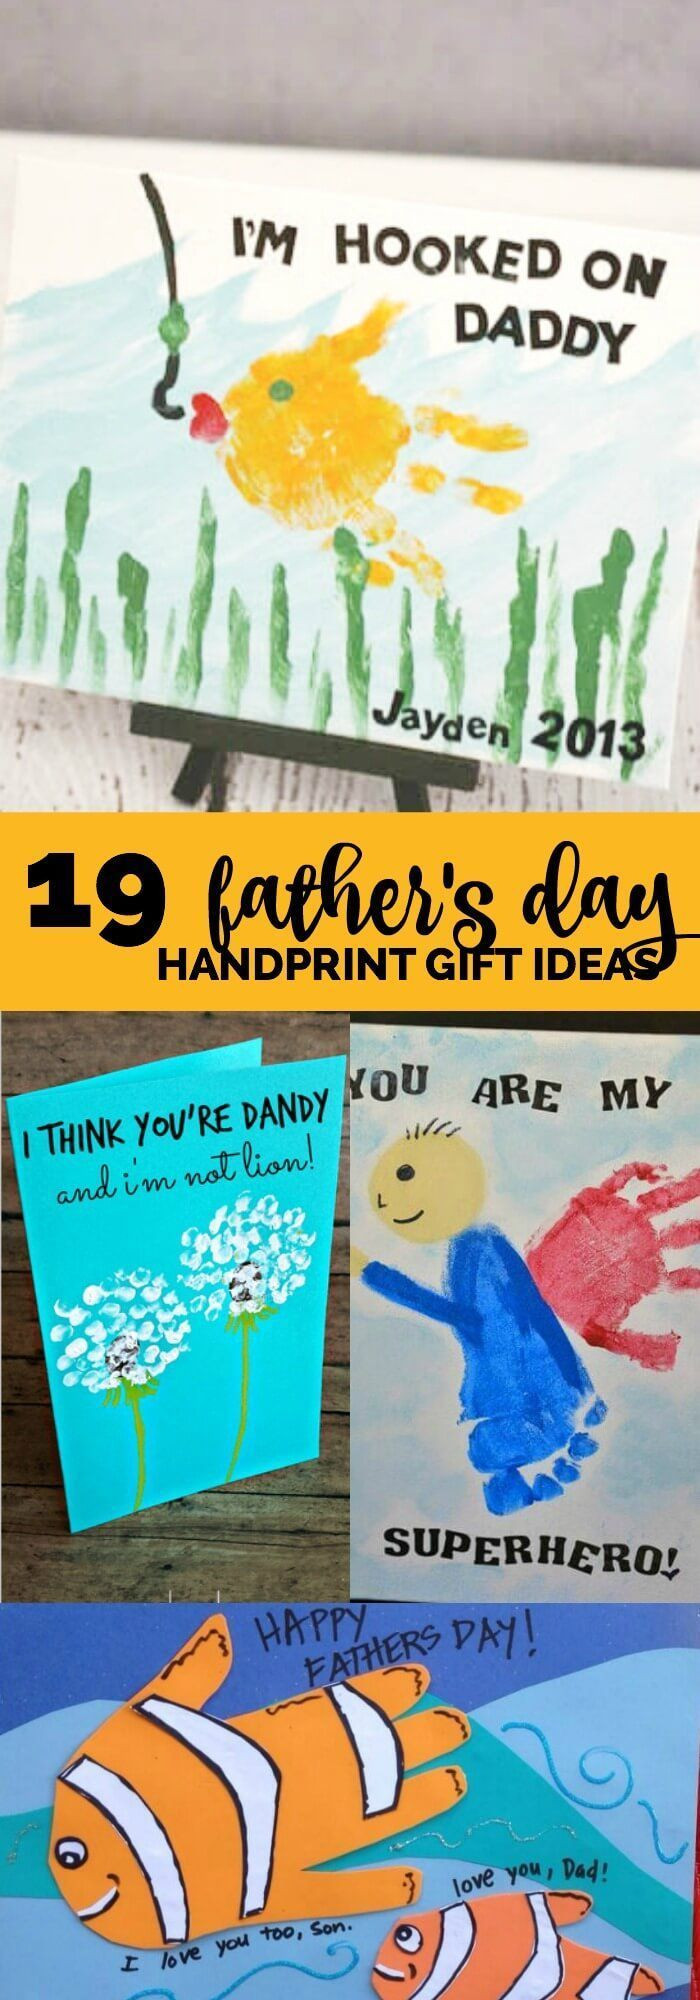 Baby Handprint Gift Ideas
 25 best ideas about Fathers Gifts on Pinterest